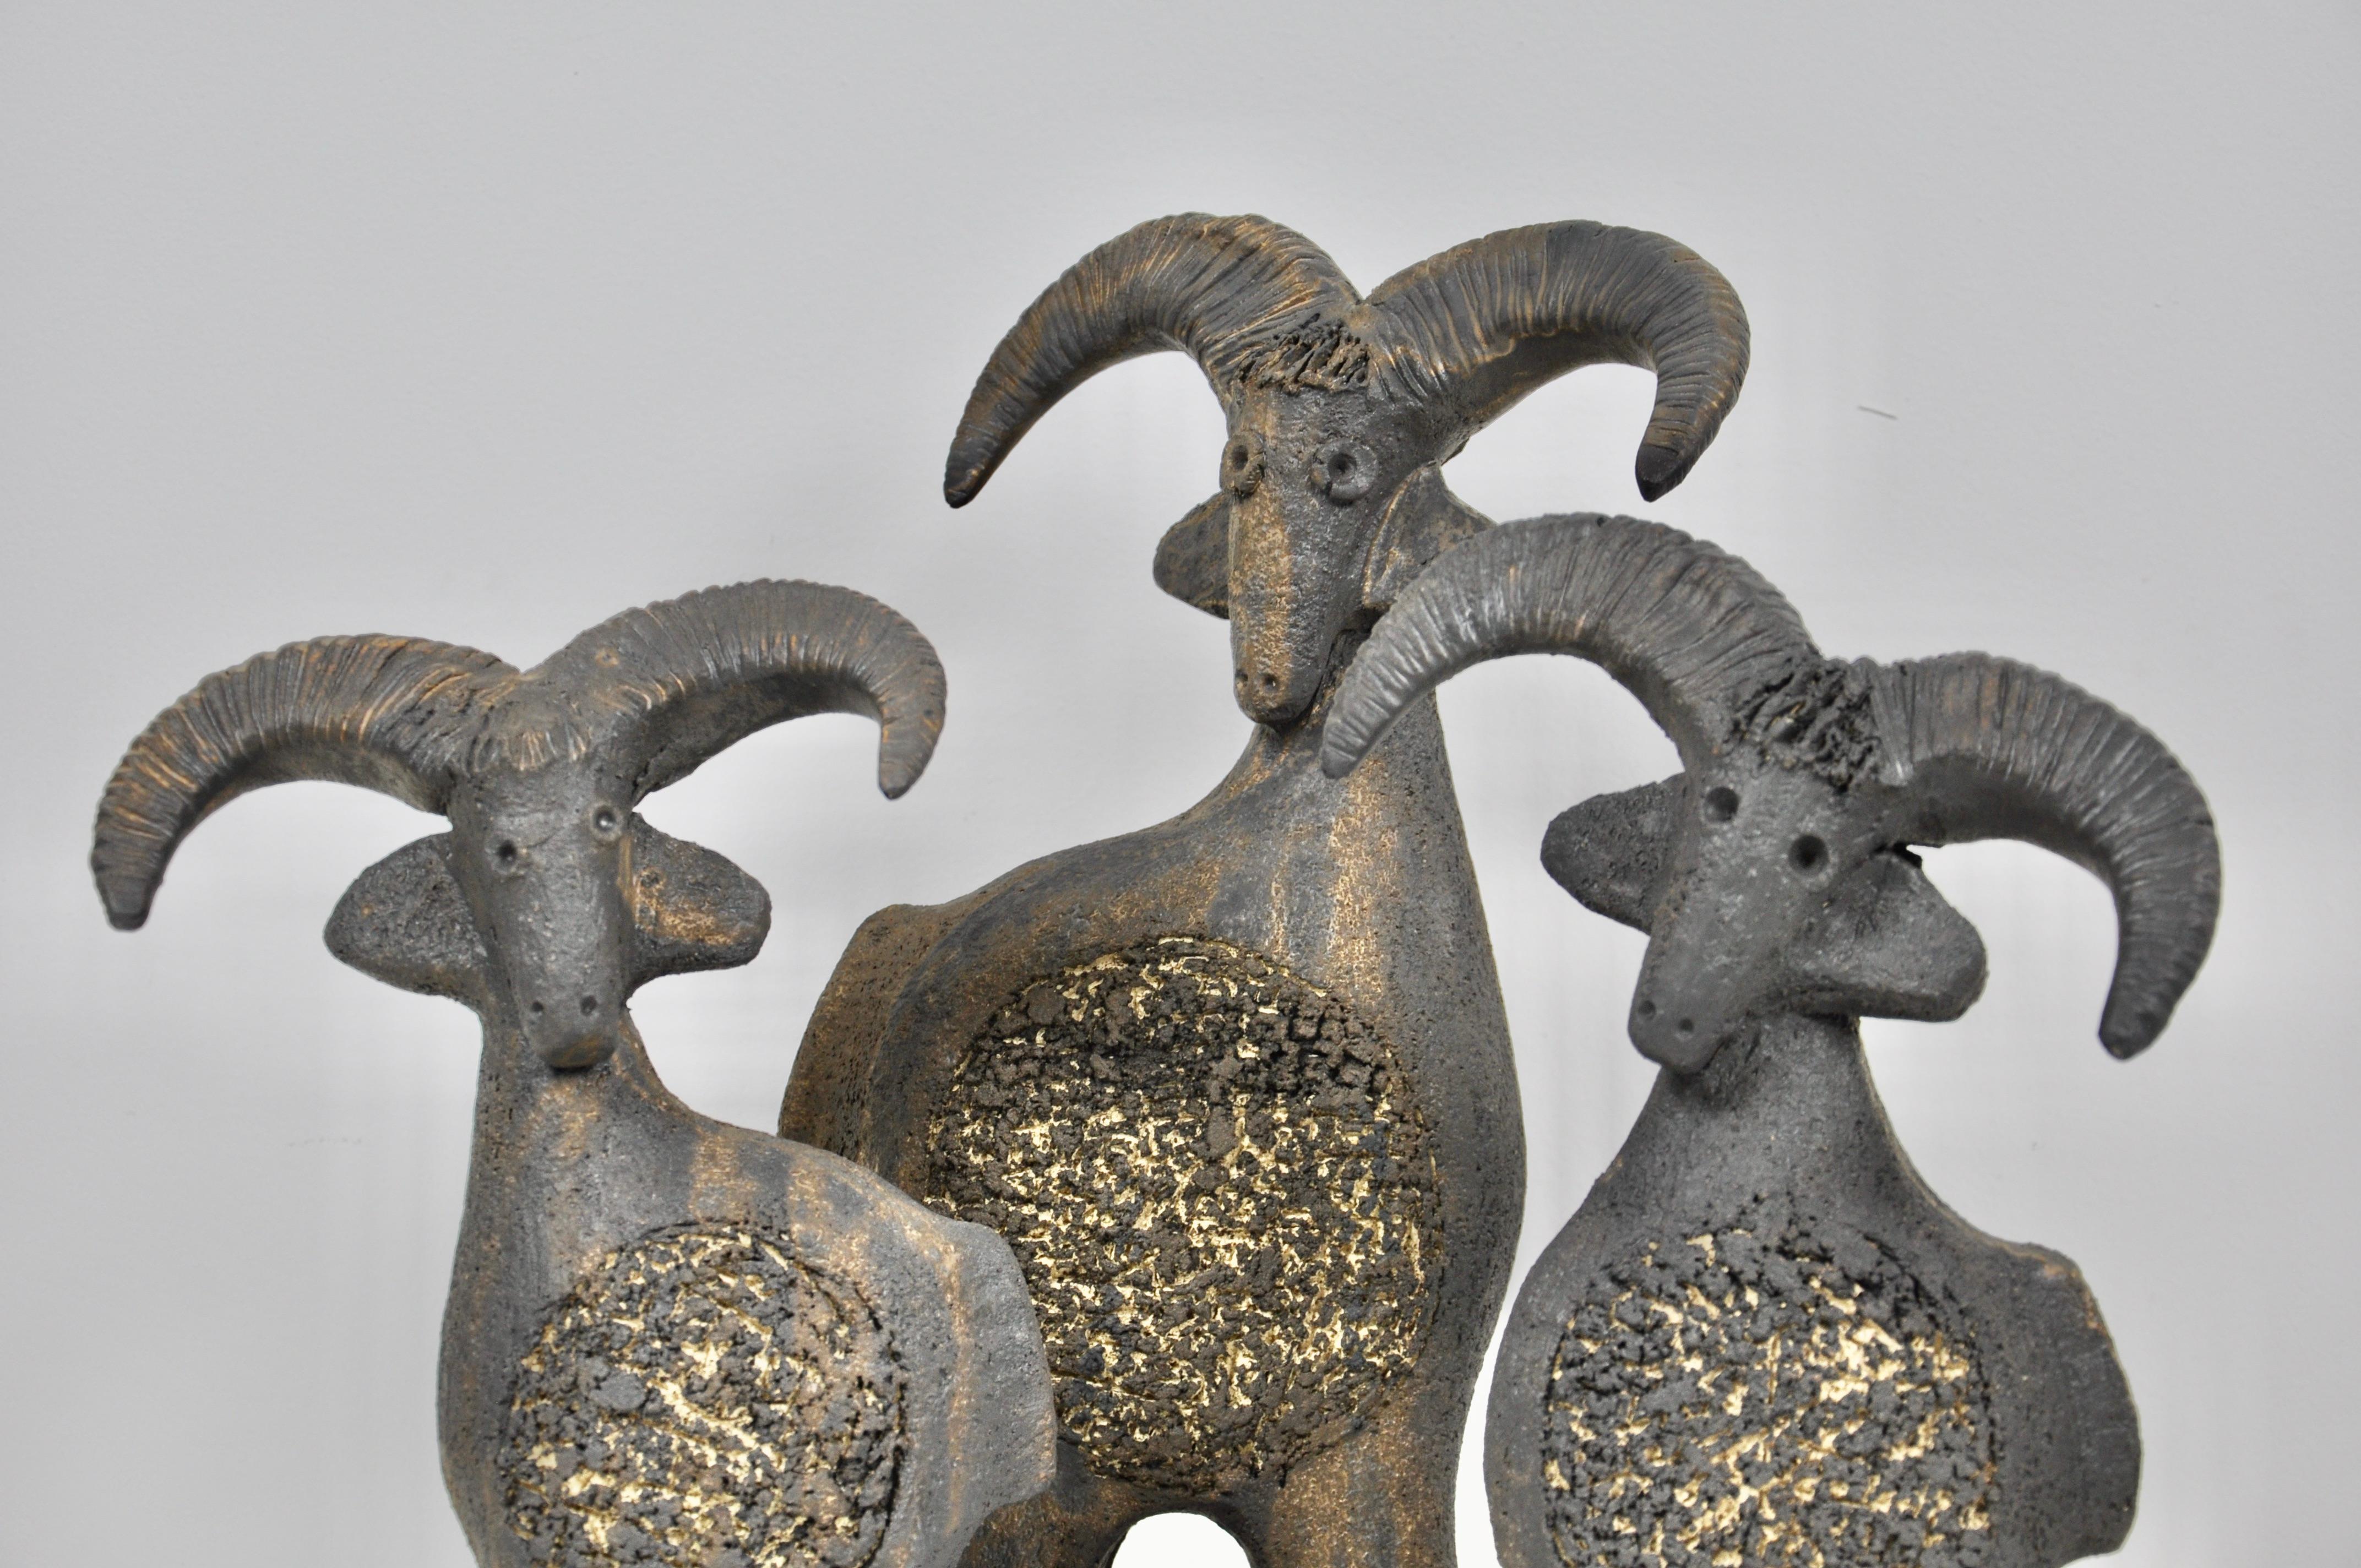 Series of 3 ceramic goats of different heights. Stamped Dominique Pouchain.
Measures: Big: H: 38cm, W: 19cm, D: 14cm
Medium: H: 28cm, W: 21cm, D: 8cm
Small: H: 29cm, W: 15cm, D: 10cm.